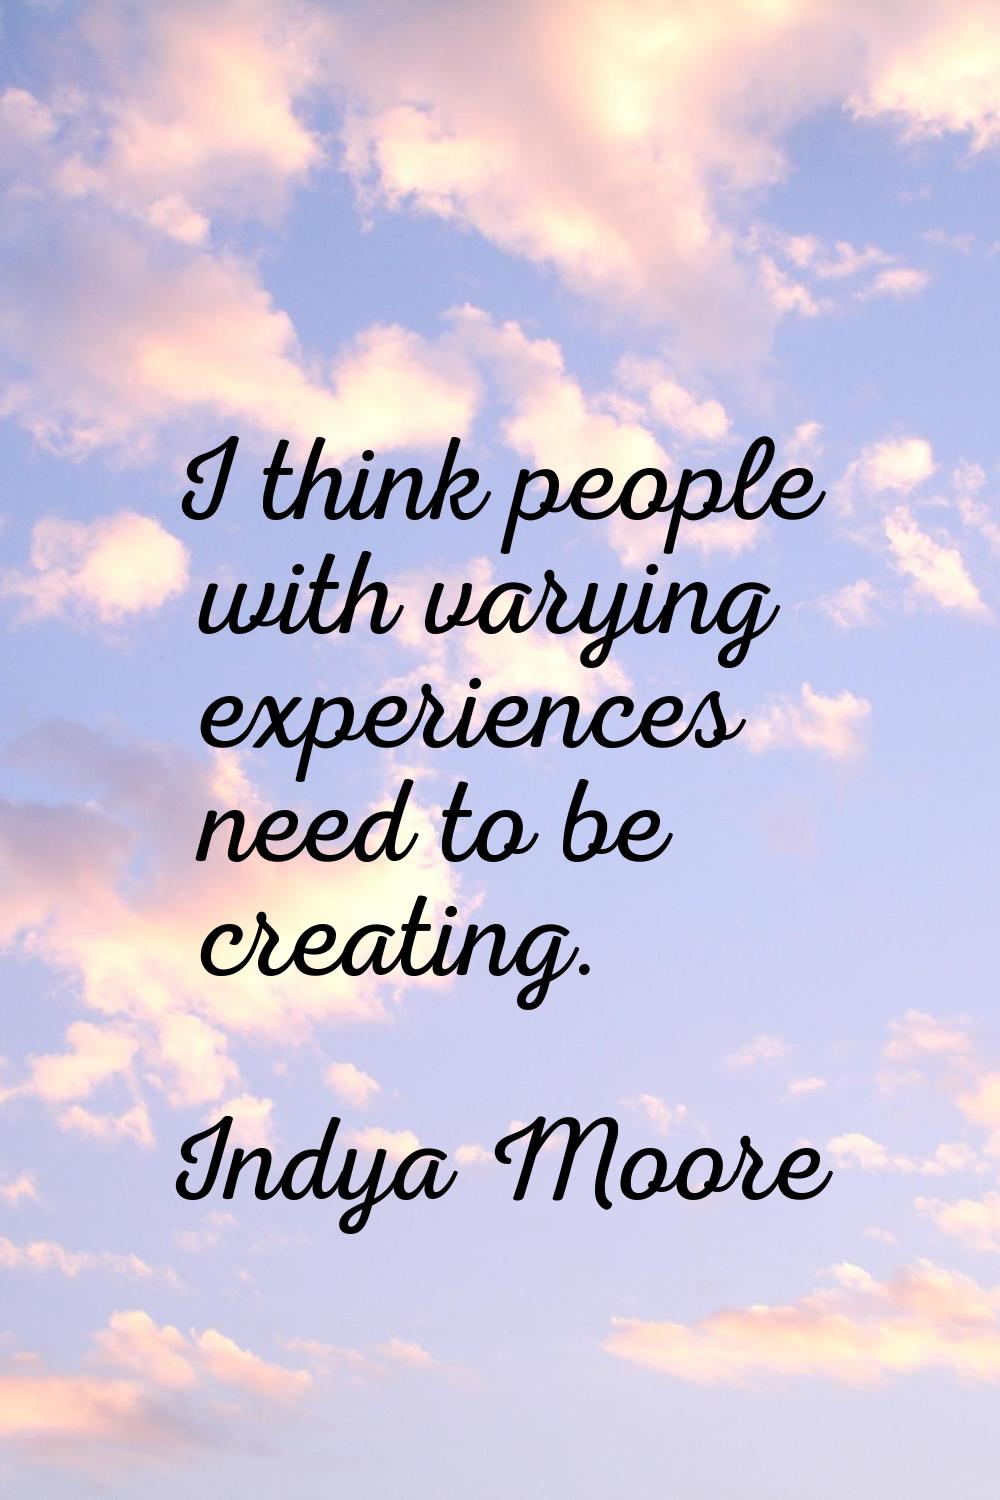 I think people with varying experiences need to be creating.